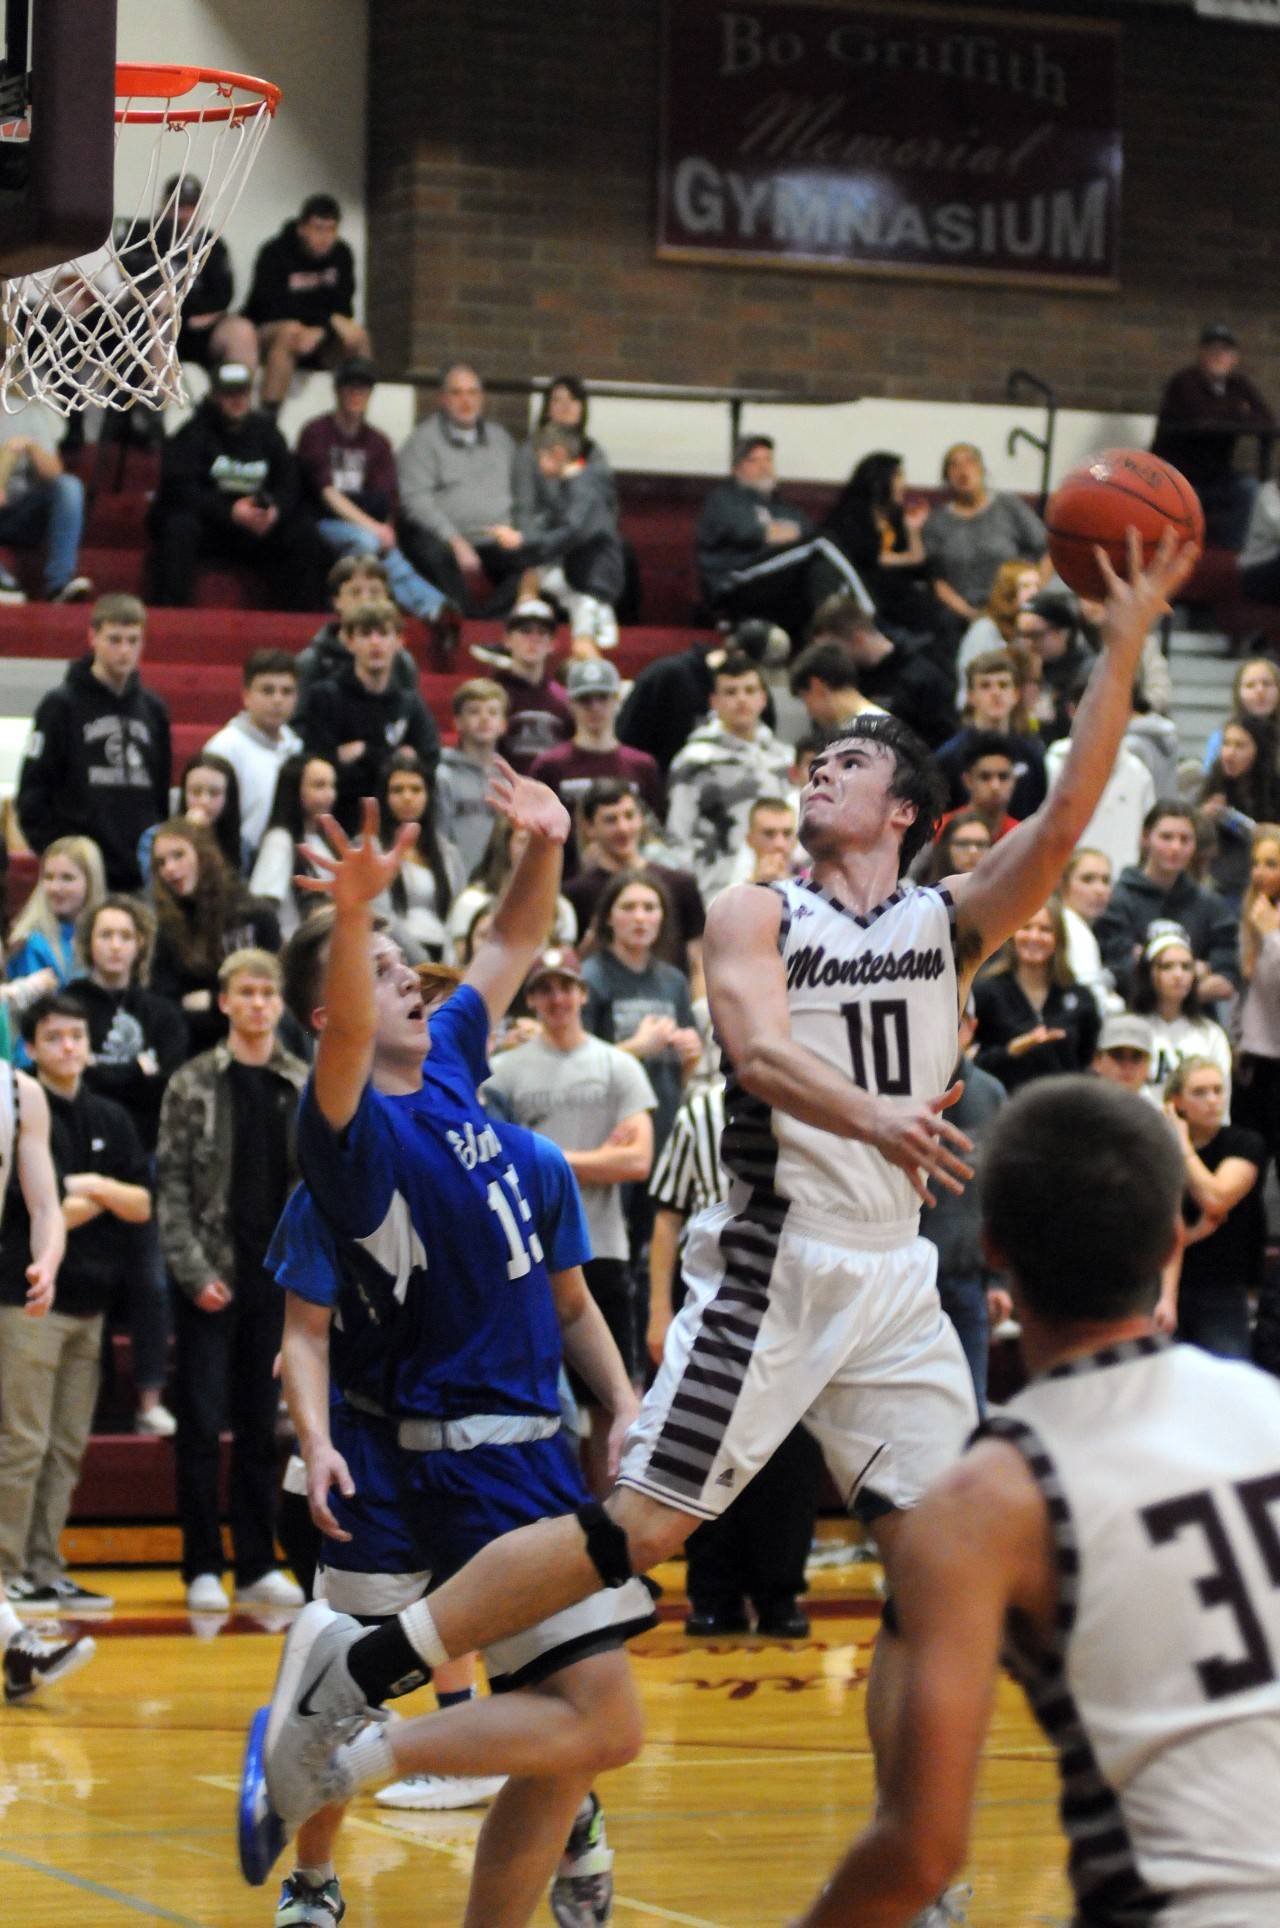 Montesano’s Trace Ridgway (10) puts up an over-the-shoulder hook shot while Elma’s Brady Johnston defends during the Bulldogs’ 70-61 victory on Thursday at Montesano High School. (Ryan Sparks | Grays Harbor News Group)